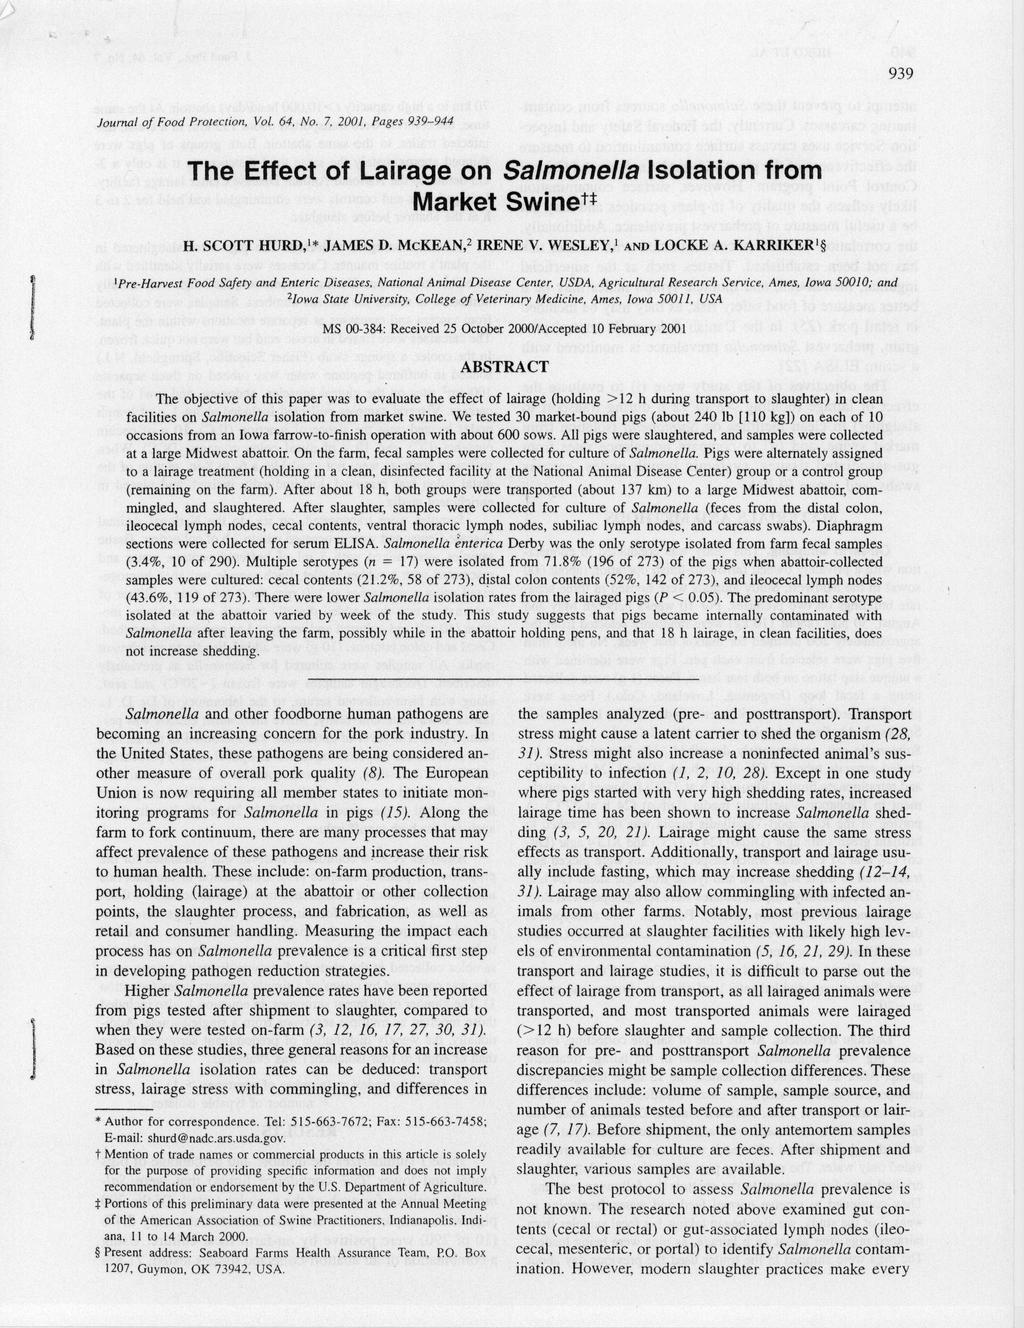 99 Journal of Food Protection, Vol. 6, No. 7, 2. Pages 99-9 The Effect of Lairage on Salmonella Isolation from Market Swinett H. SCOTT HURD,'* JAMES D. McKEAN,2 IRENE V. WESLEY,' AND LOCKE A.